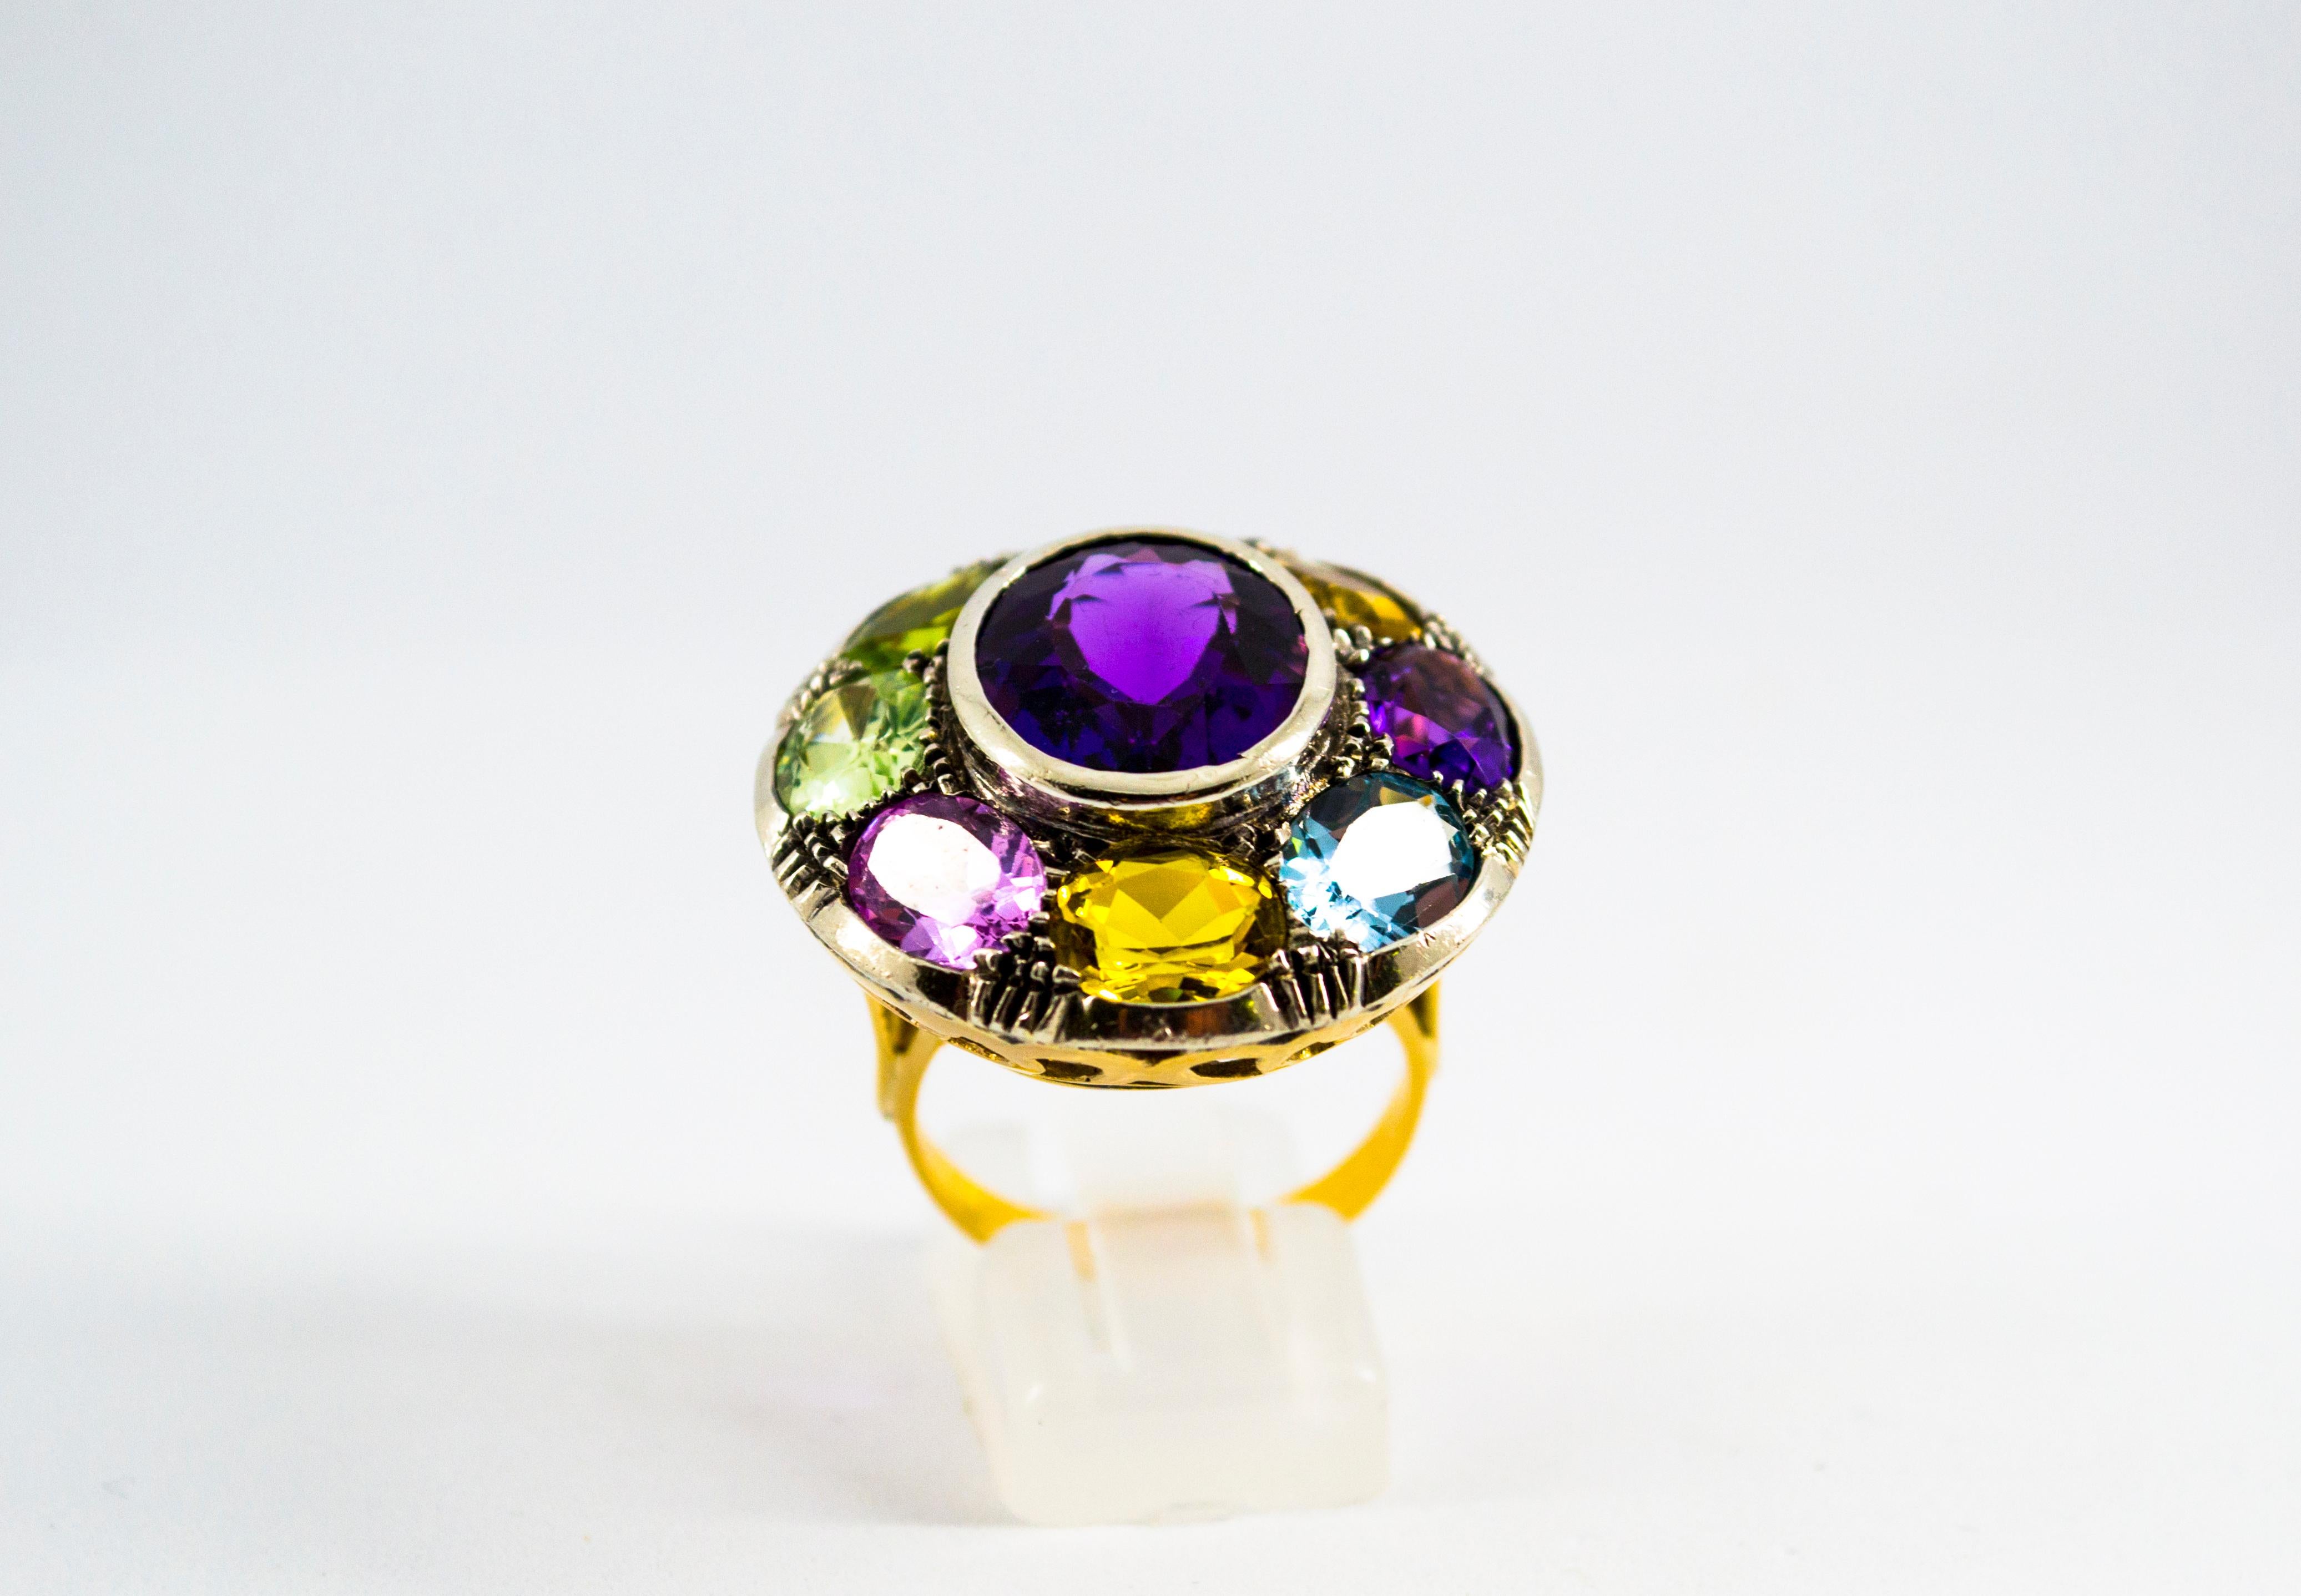 This Ring is made of 9K Yellow Gold and Sterling Silver.
This Ring has Amethyst, Peridot, Citrine, Lemon Quartz, Blue Topaz.
This Ring is inspired by Art Nouveau.
Size ITA: 18 USA: 8 1/4

We're a workshop so every piece is handmade, customizable and